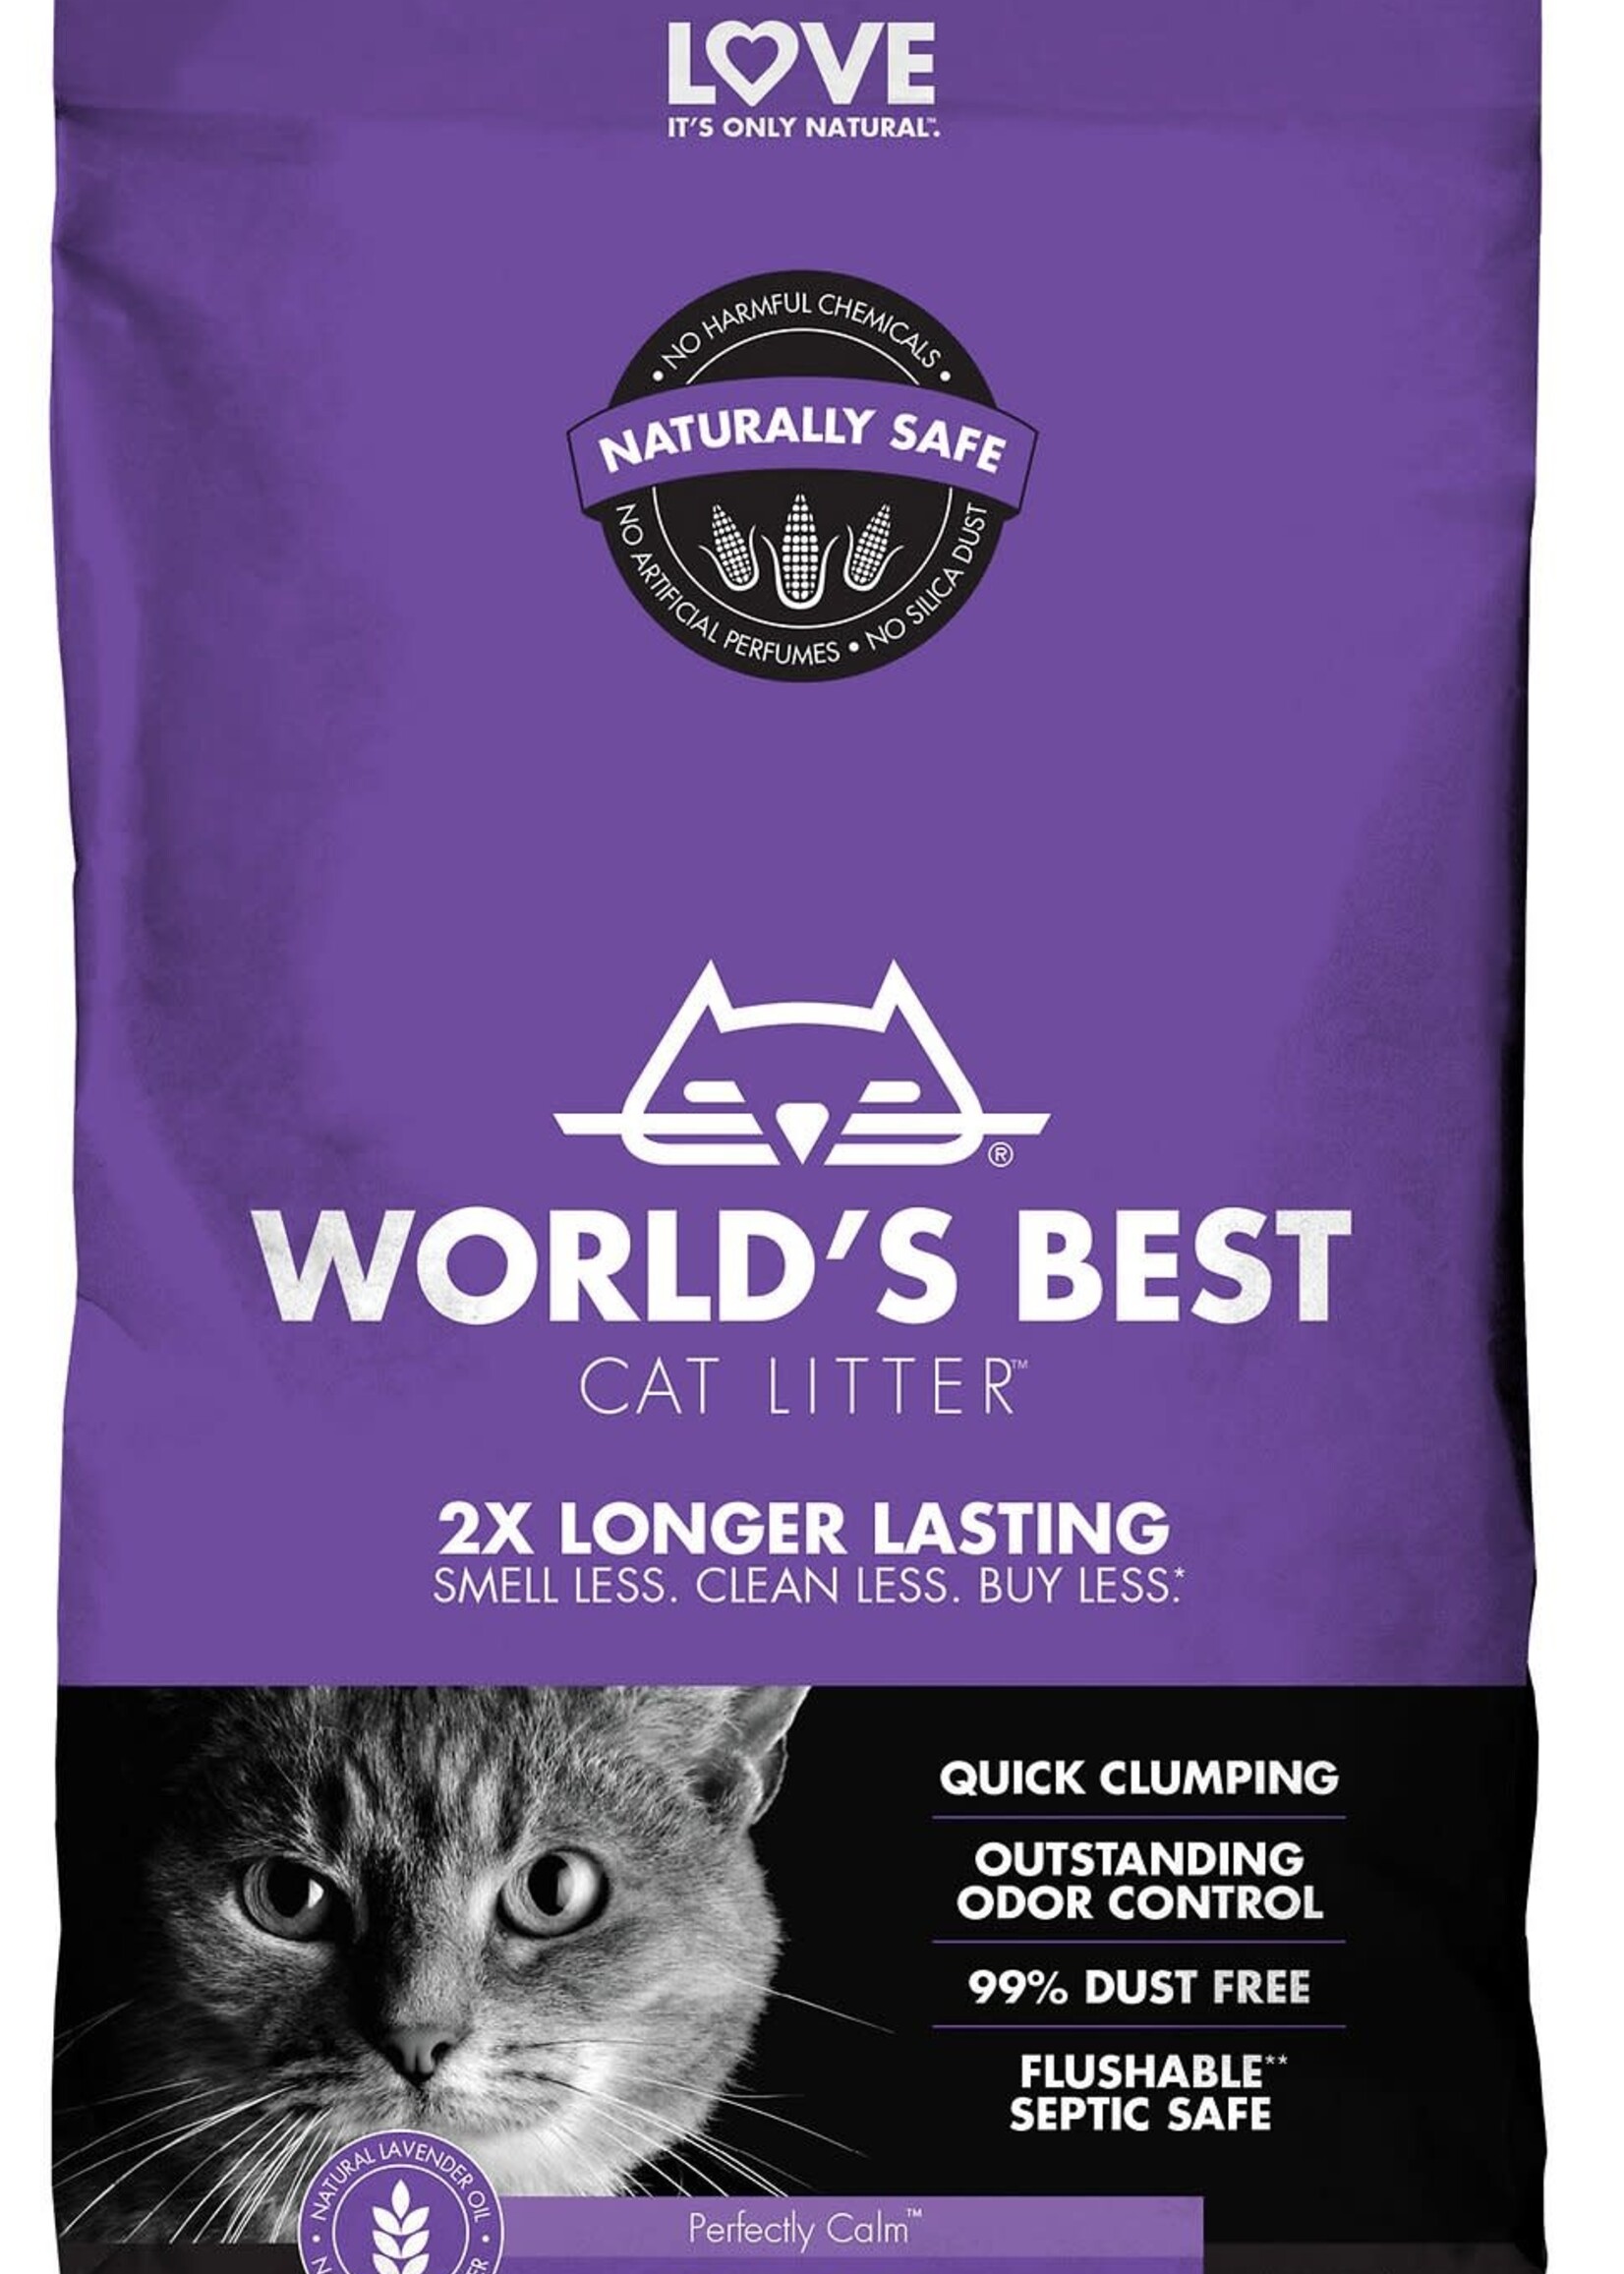 World's Best Cat Litter World's Best Cat Litter Lavender Scented Multiple Cat Clumping Corn Litter